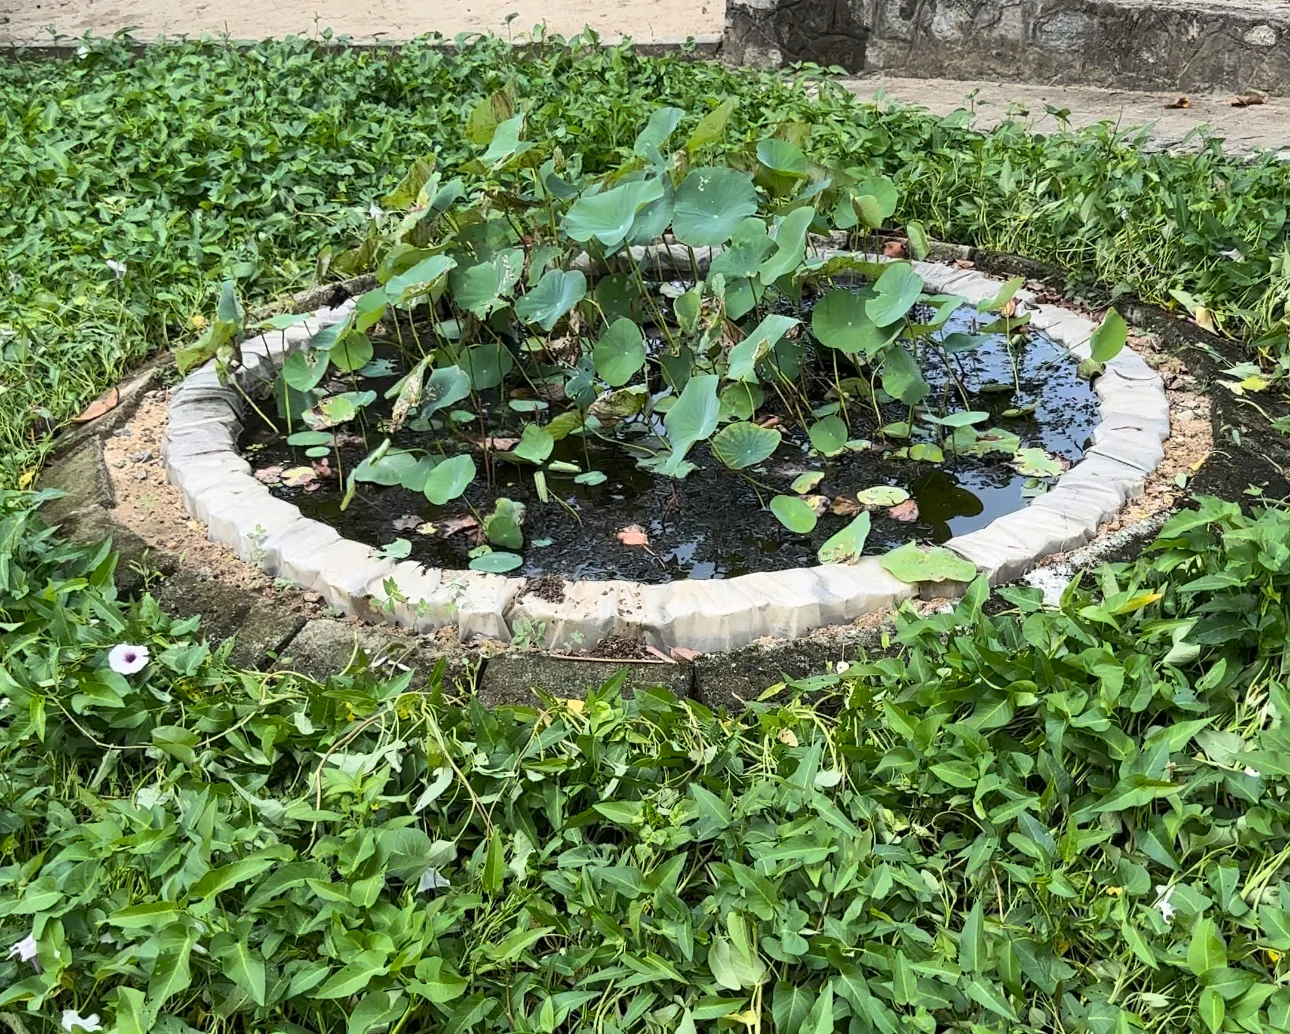 pond with water plant in it surrounded by other plants